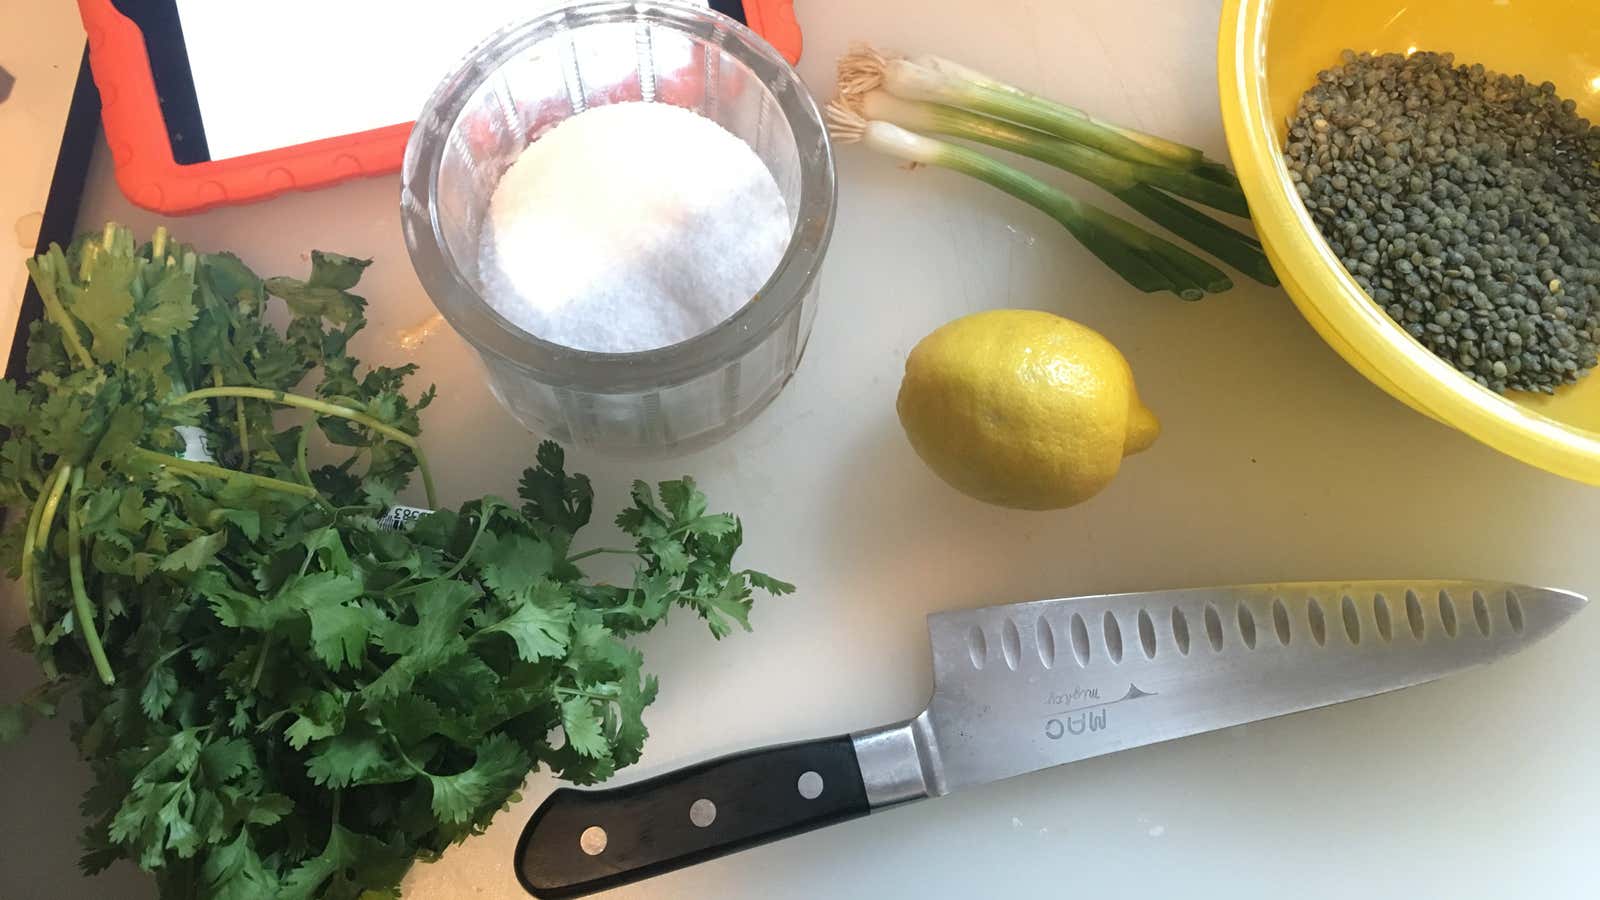 The recipe calls for oregano, but all I have is cilantro. To the comments!